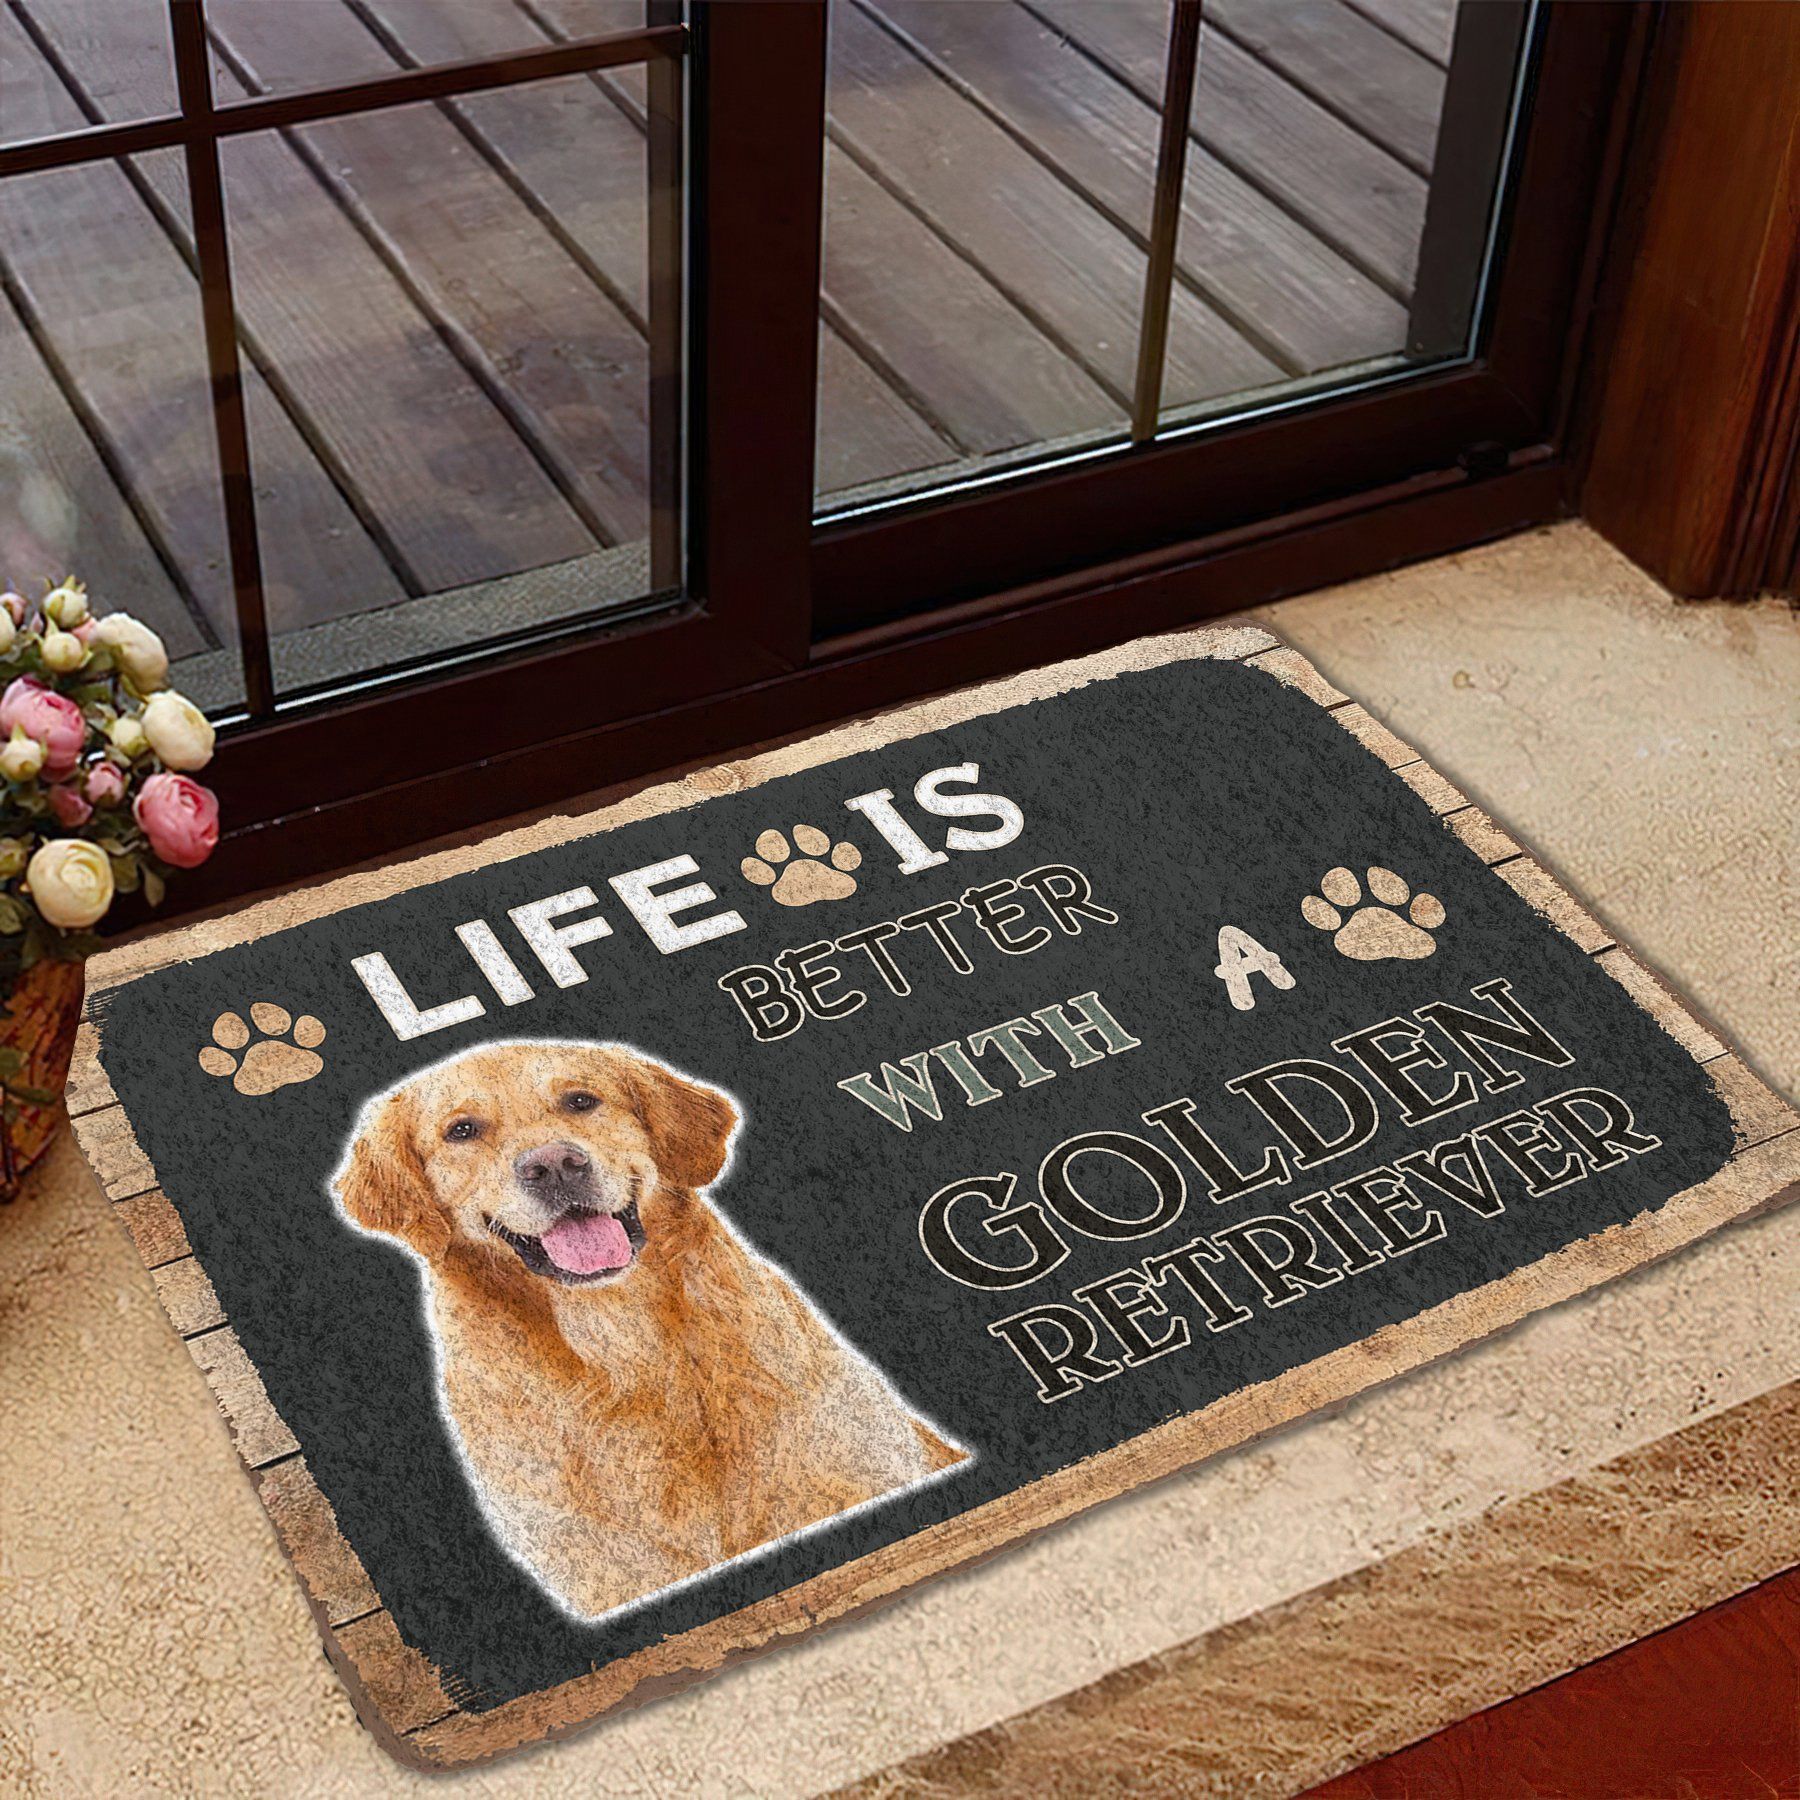 Its Not-a Home Without A Golden Retriever Doormat - simplexgift